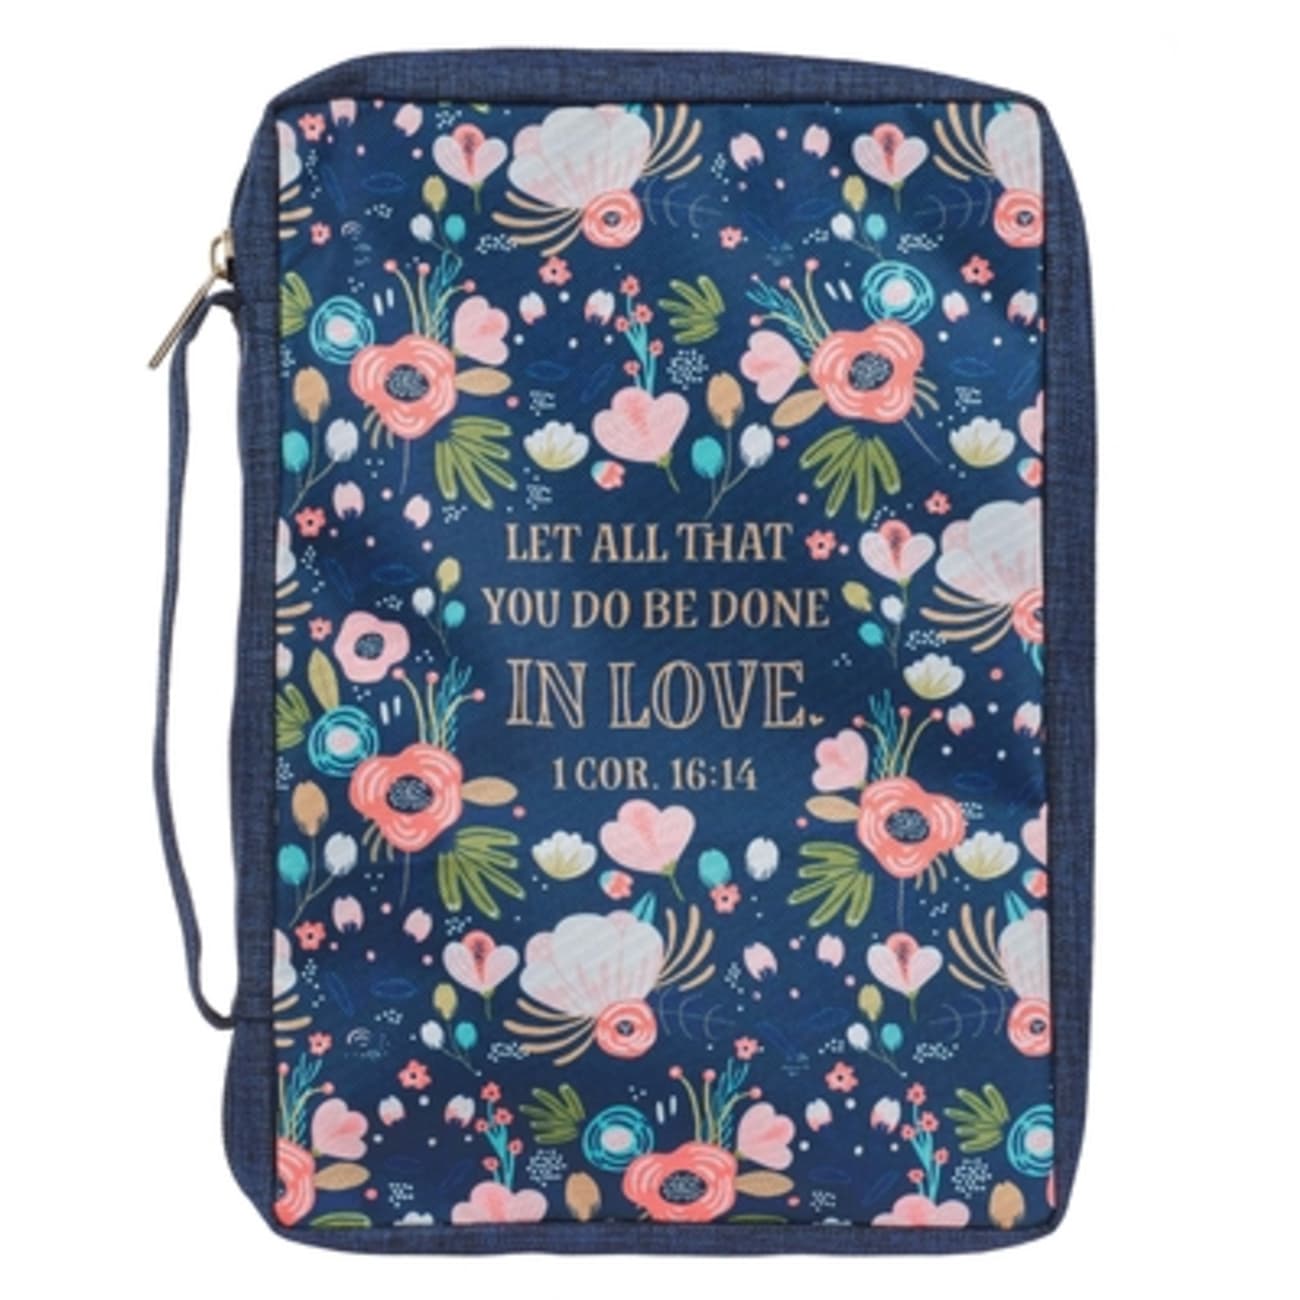 Bible Cover Medium: Let All That You Do Be Done in Love, Navy Floral, Poly-Canvas Bible Cover